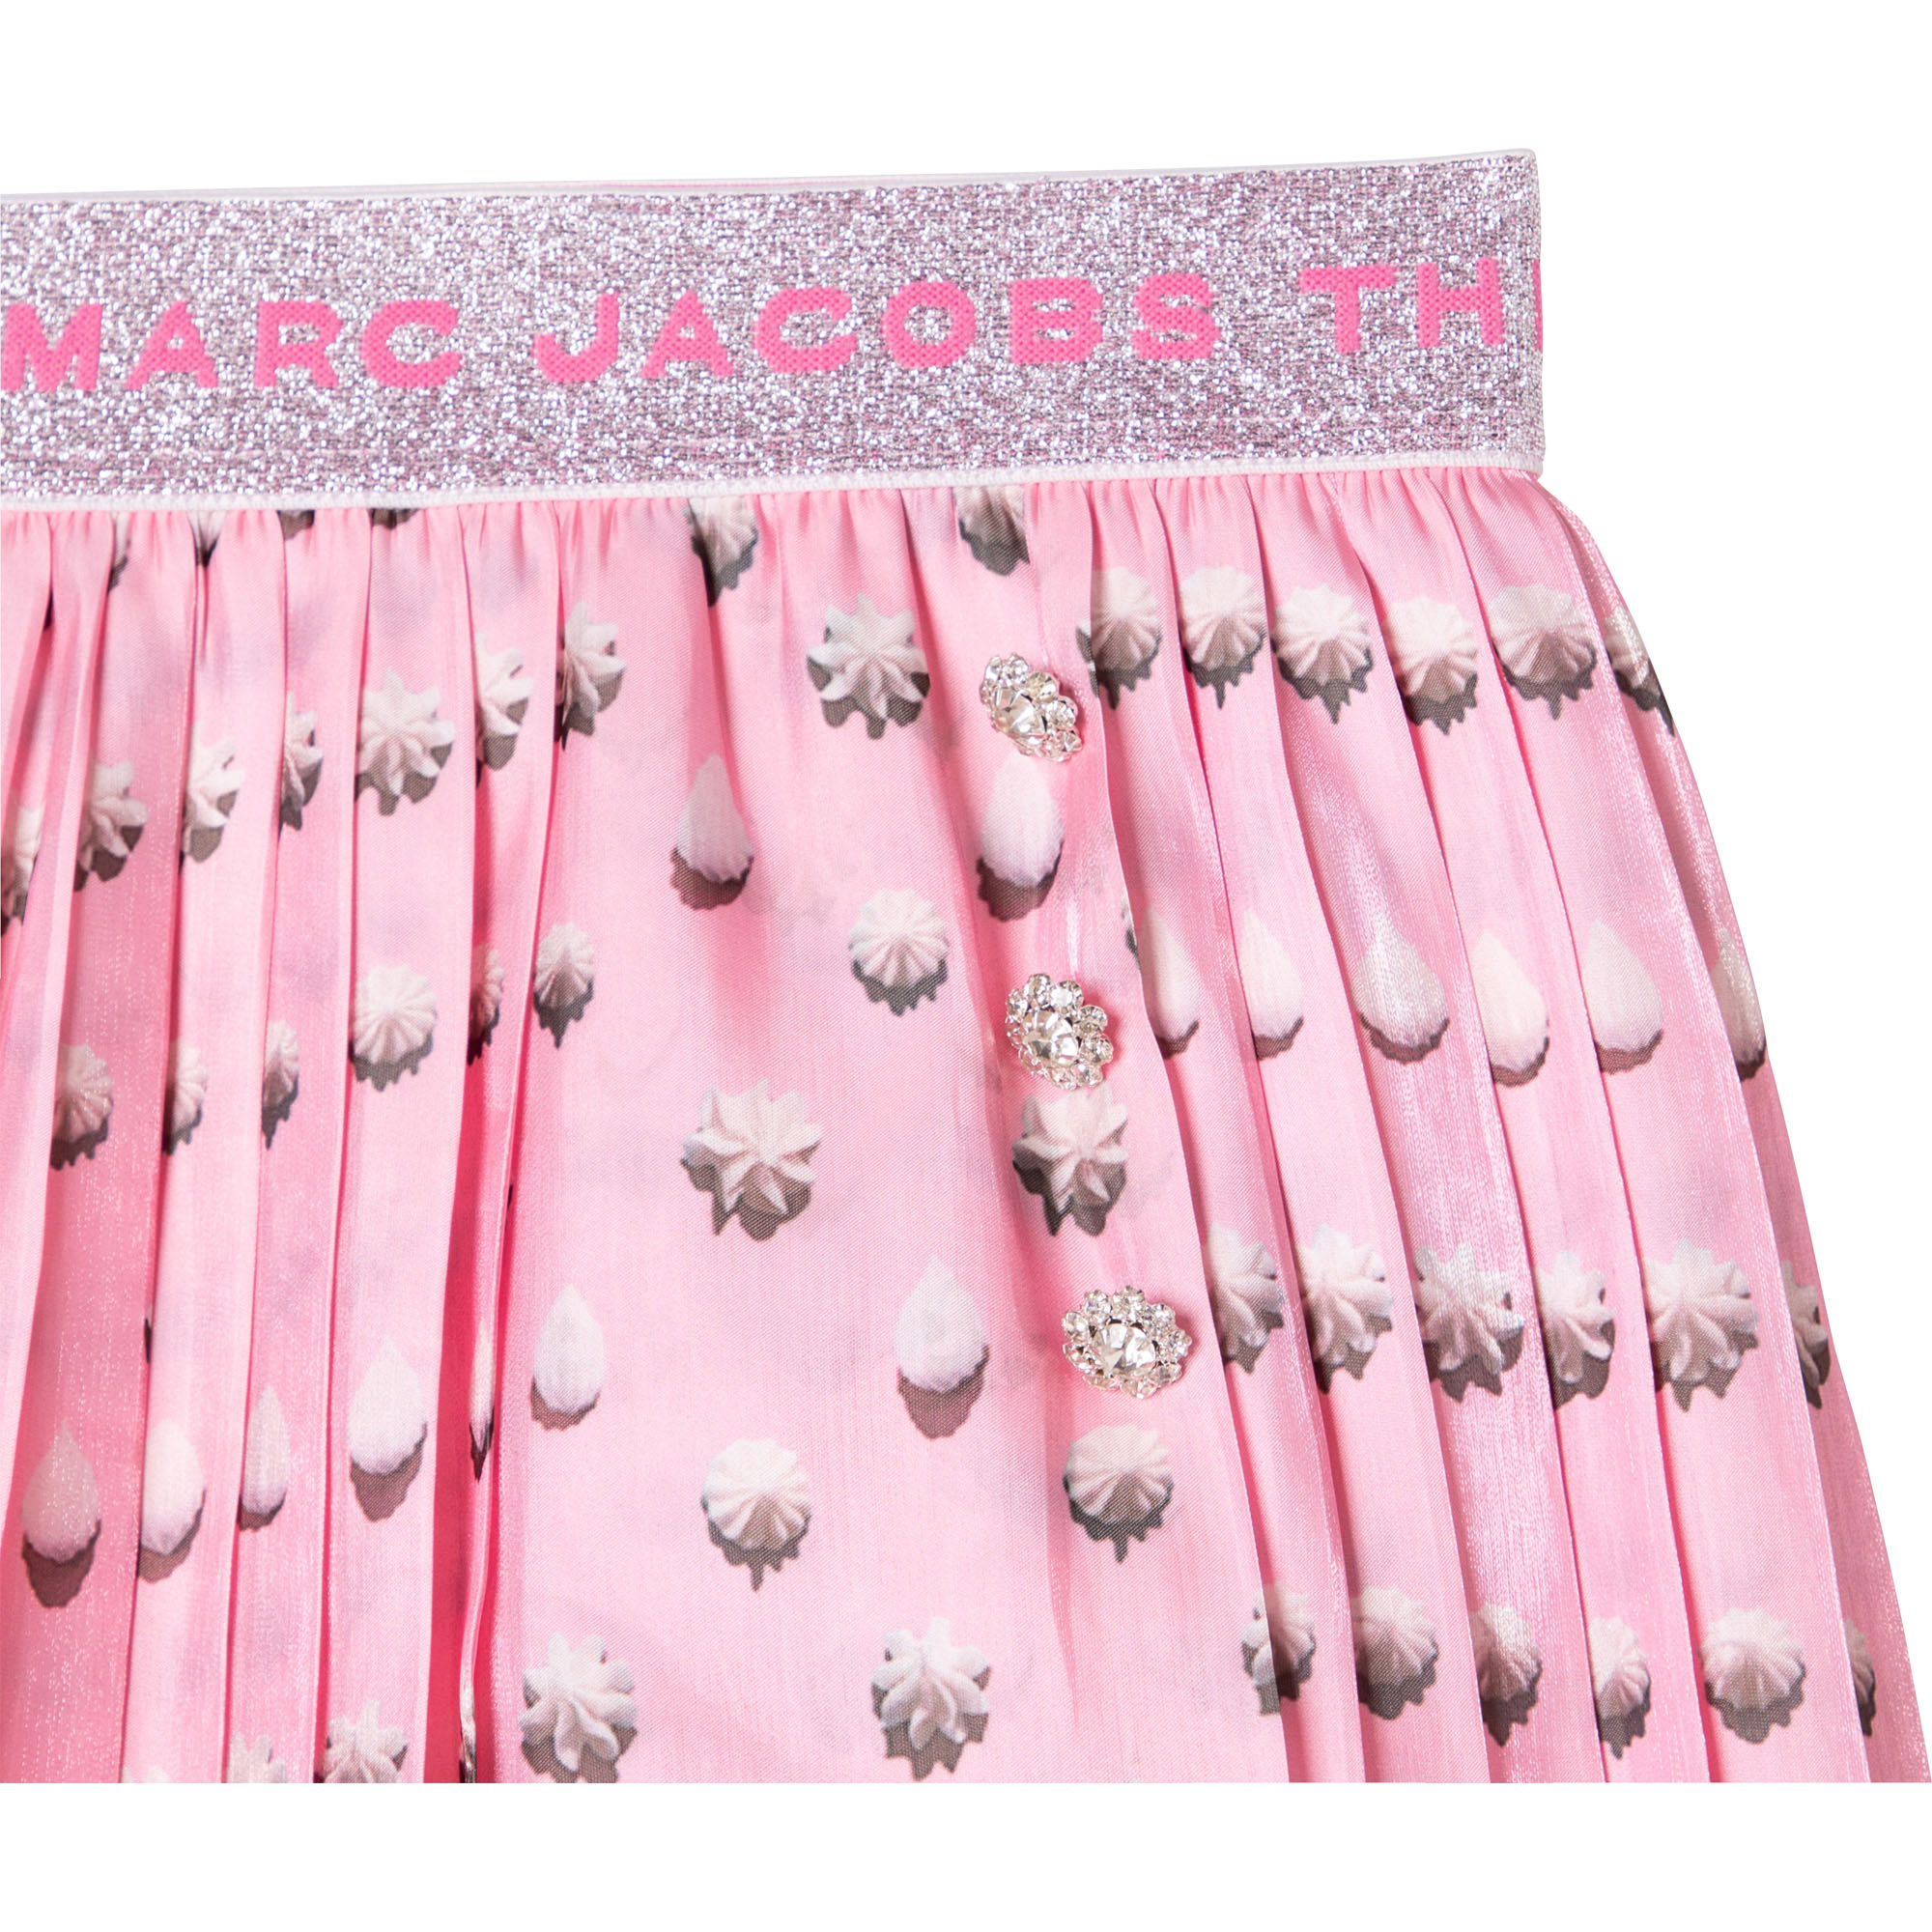 Printed pleated skirt MARC JACOBS for GIRL